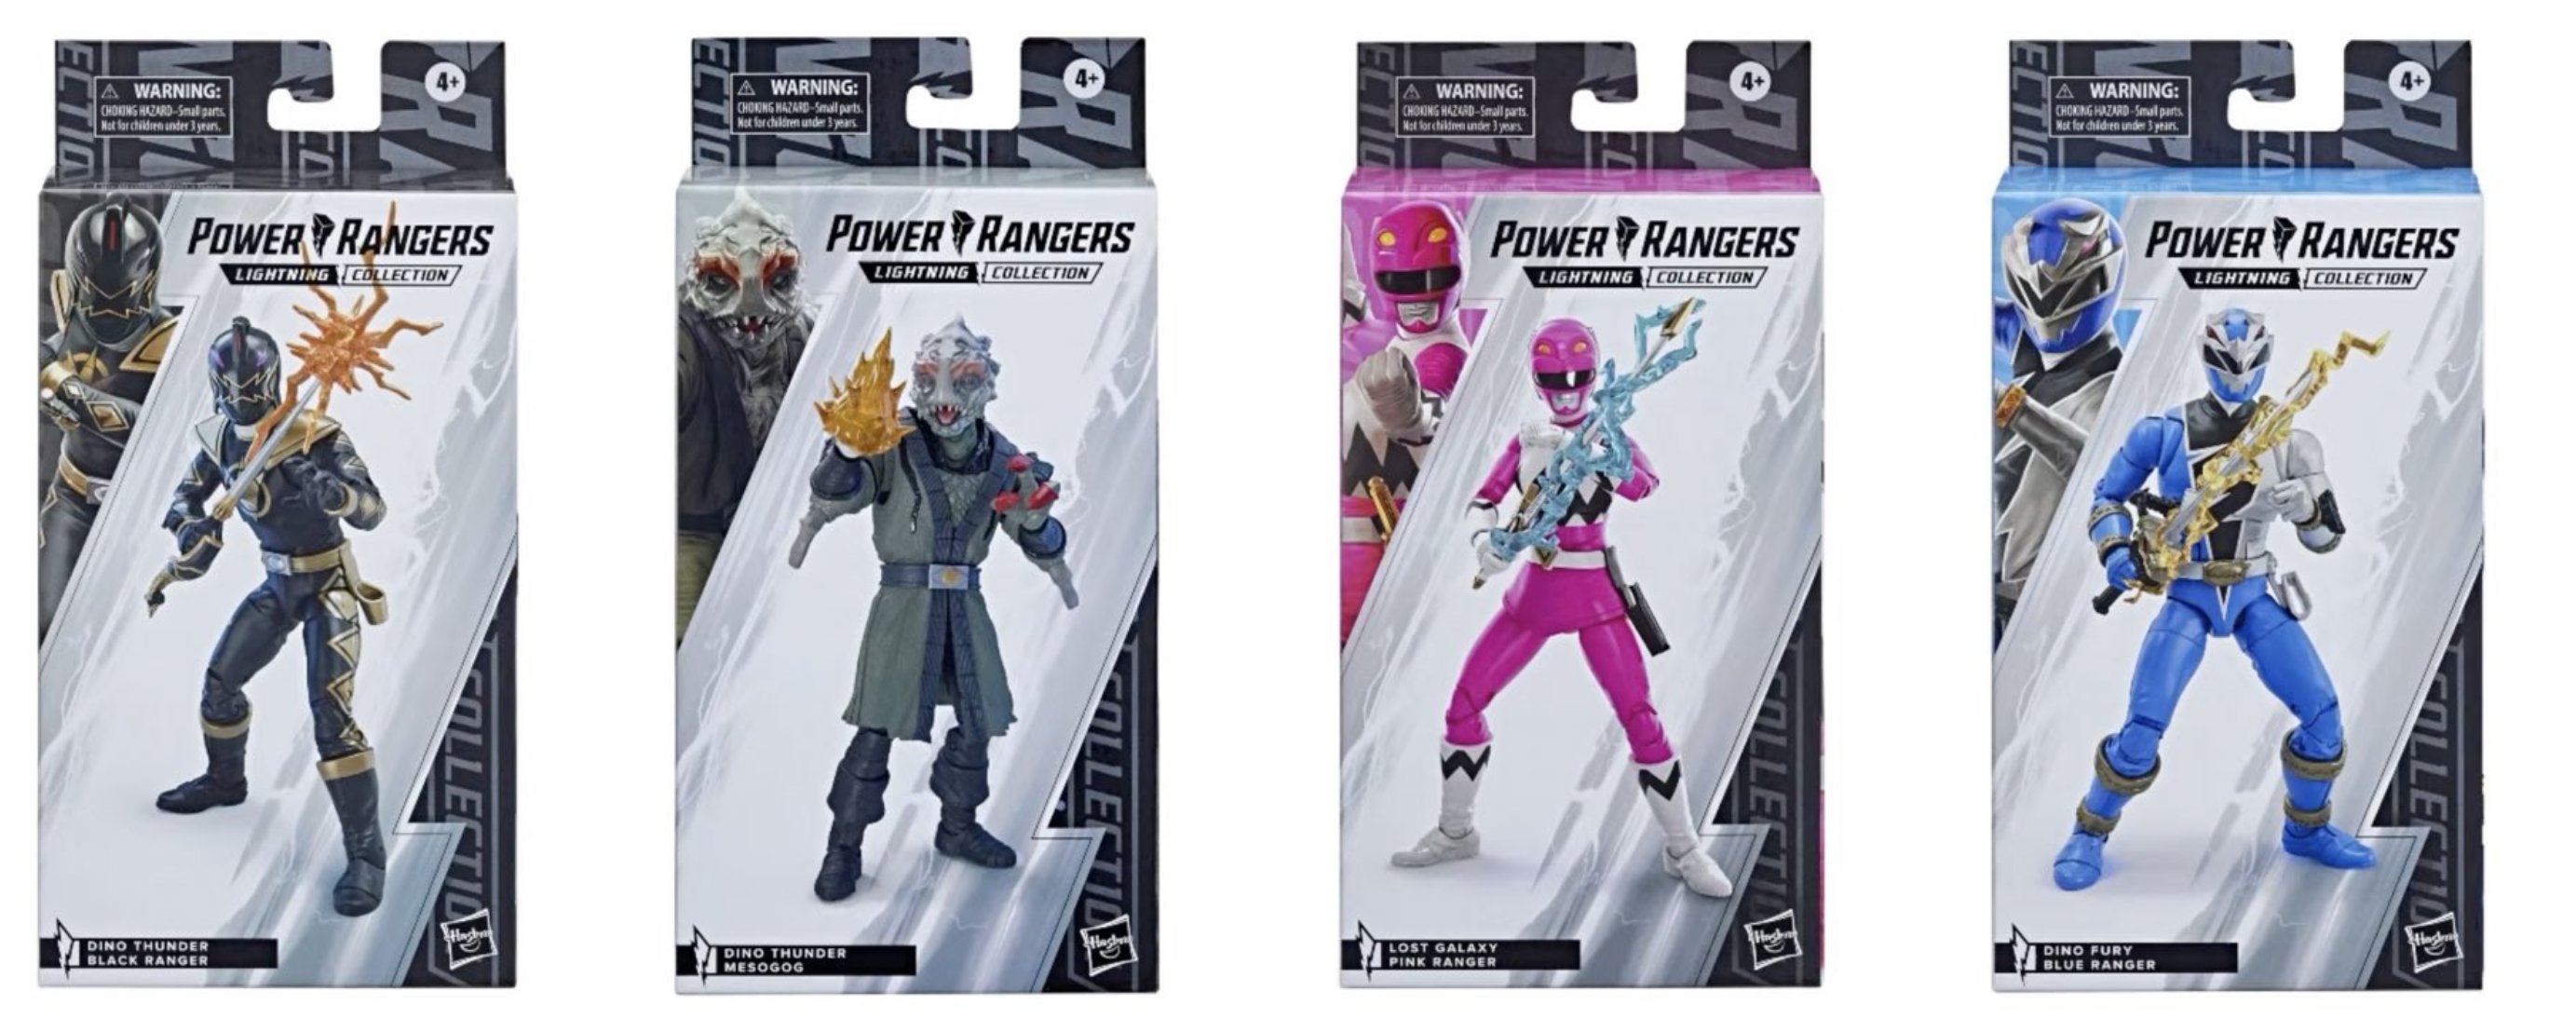 New Power Rangers Lightning Collection Releases Announced- Dino Thunder Black, Lost Galaxy Pink, Dino Fury Blue, Mesogog & Mighty Morphin Remasters!